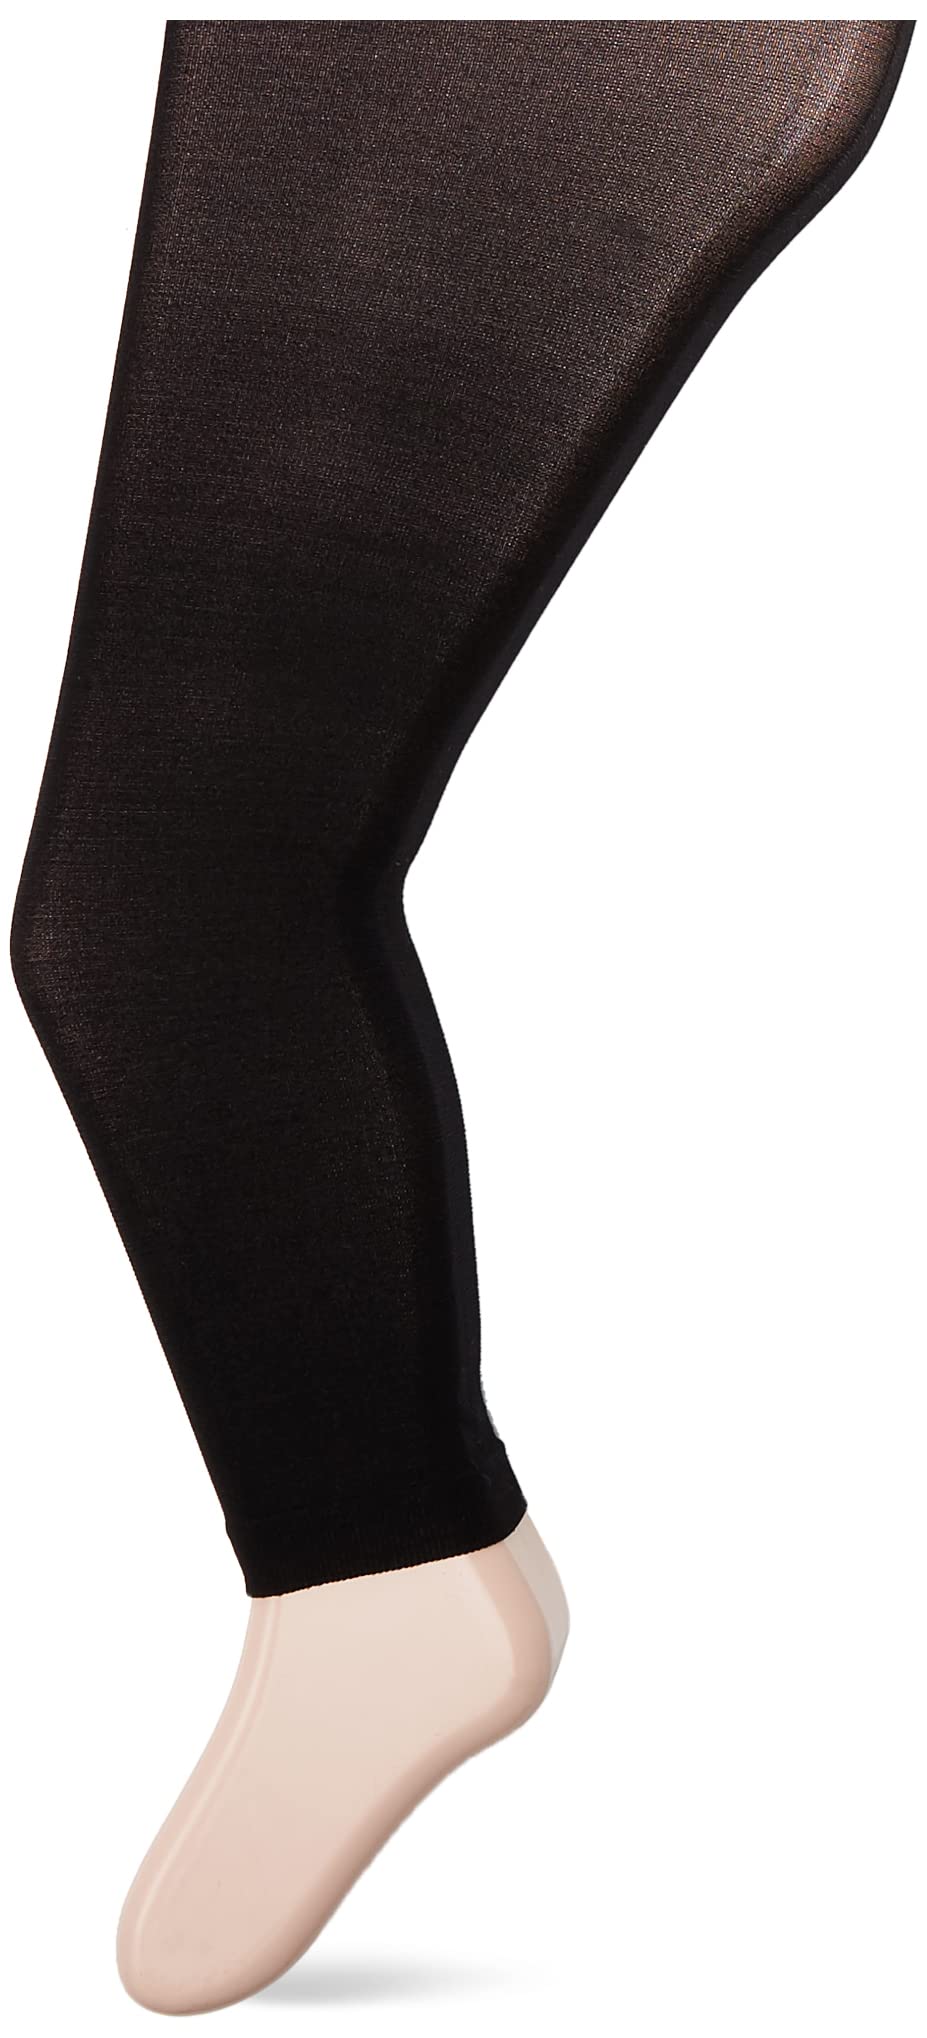 Capezio girls Hold & Stretch Footless Socks athletic dance tights, Black, 8 10 US